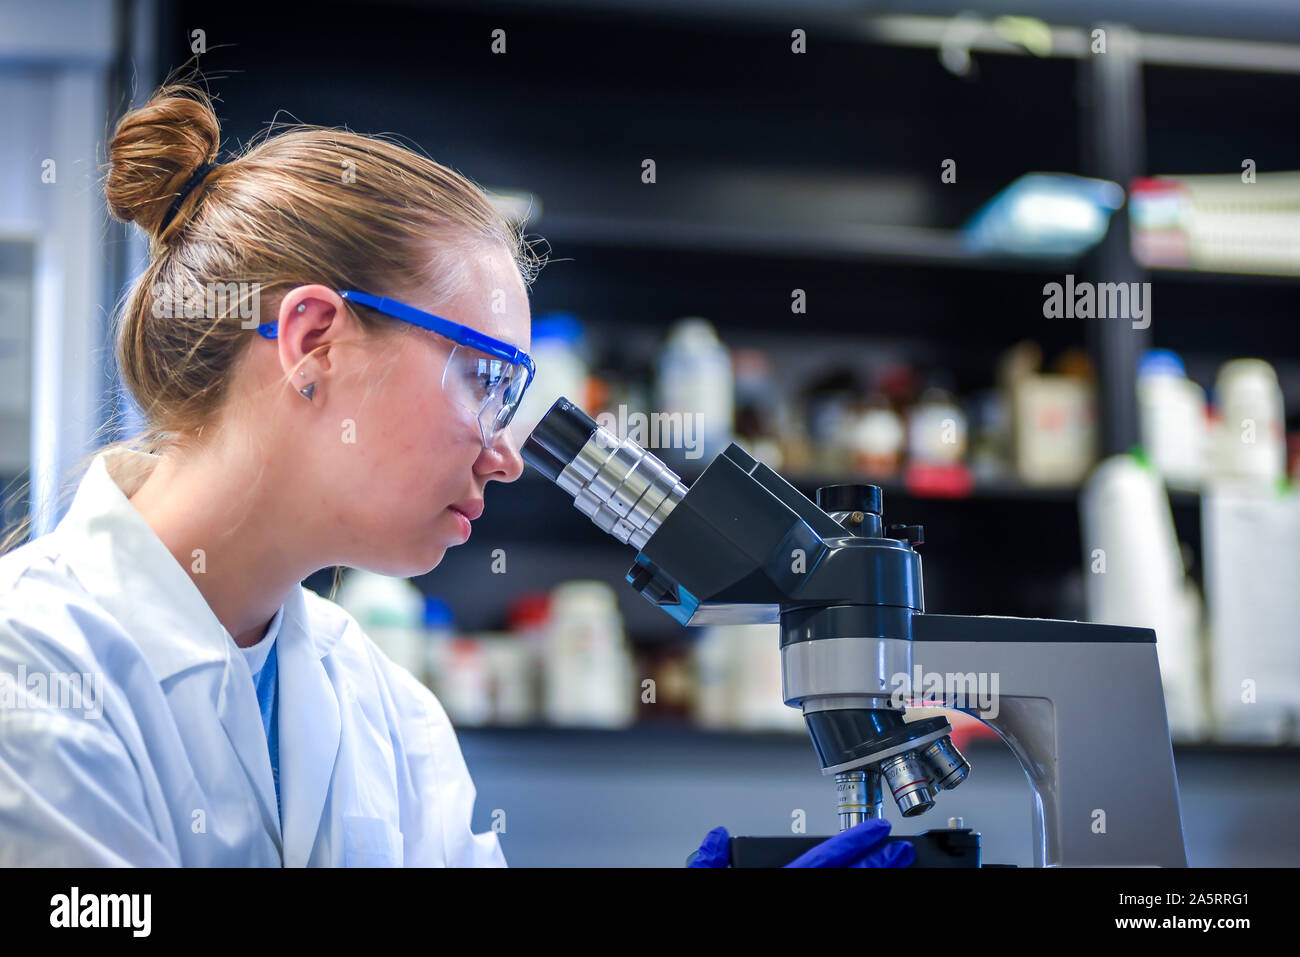 Scientists Working in The Laboratory stock photo Slovenia, Adult, Adults Only, Analyzing, Biochemistry Stock Photo